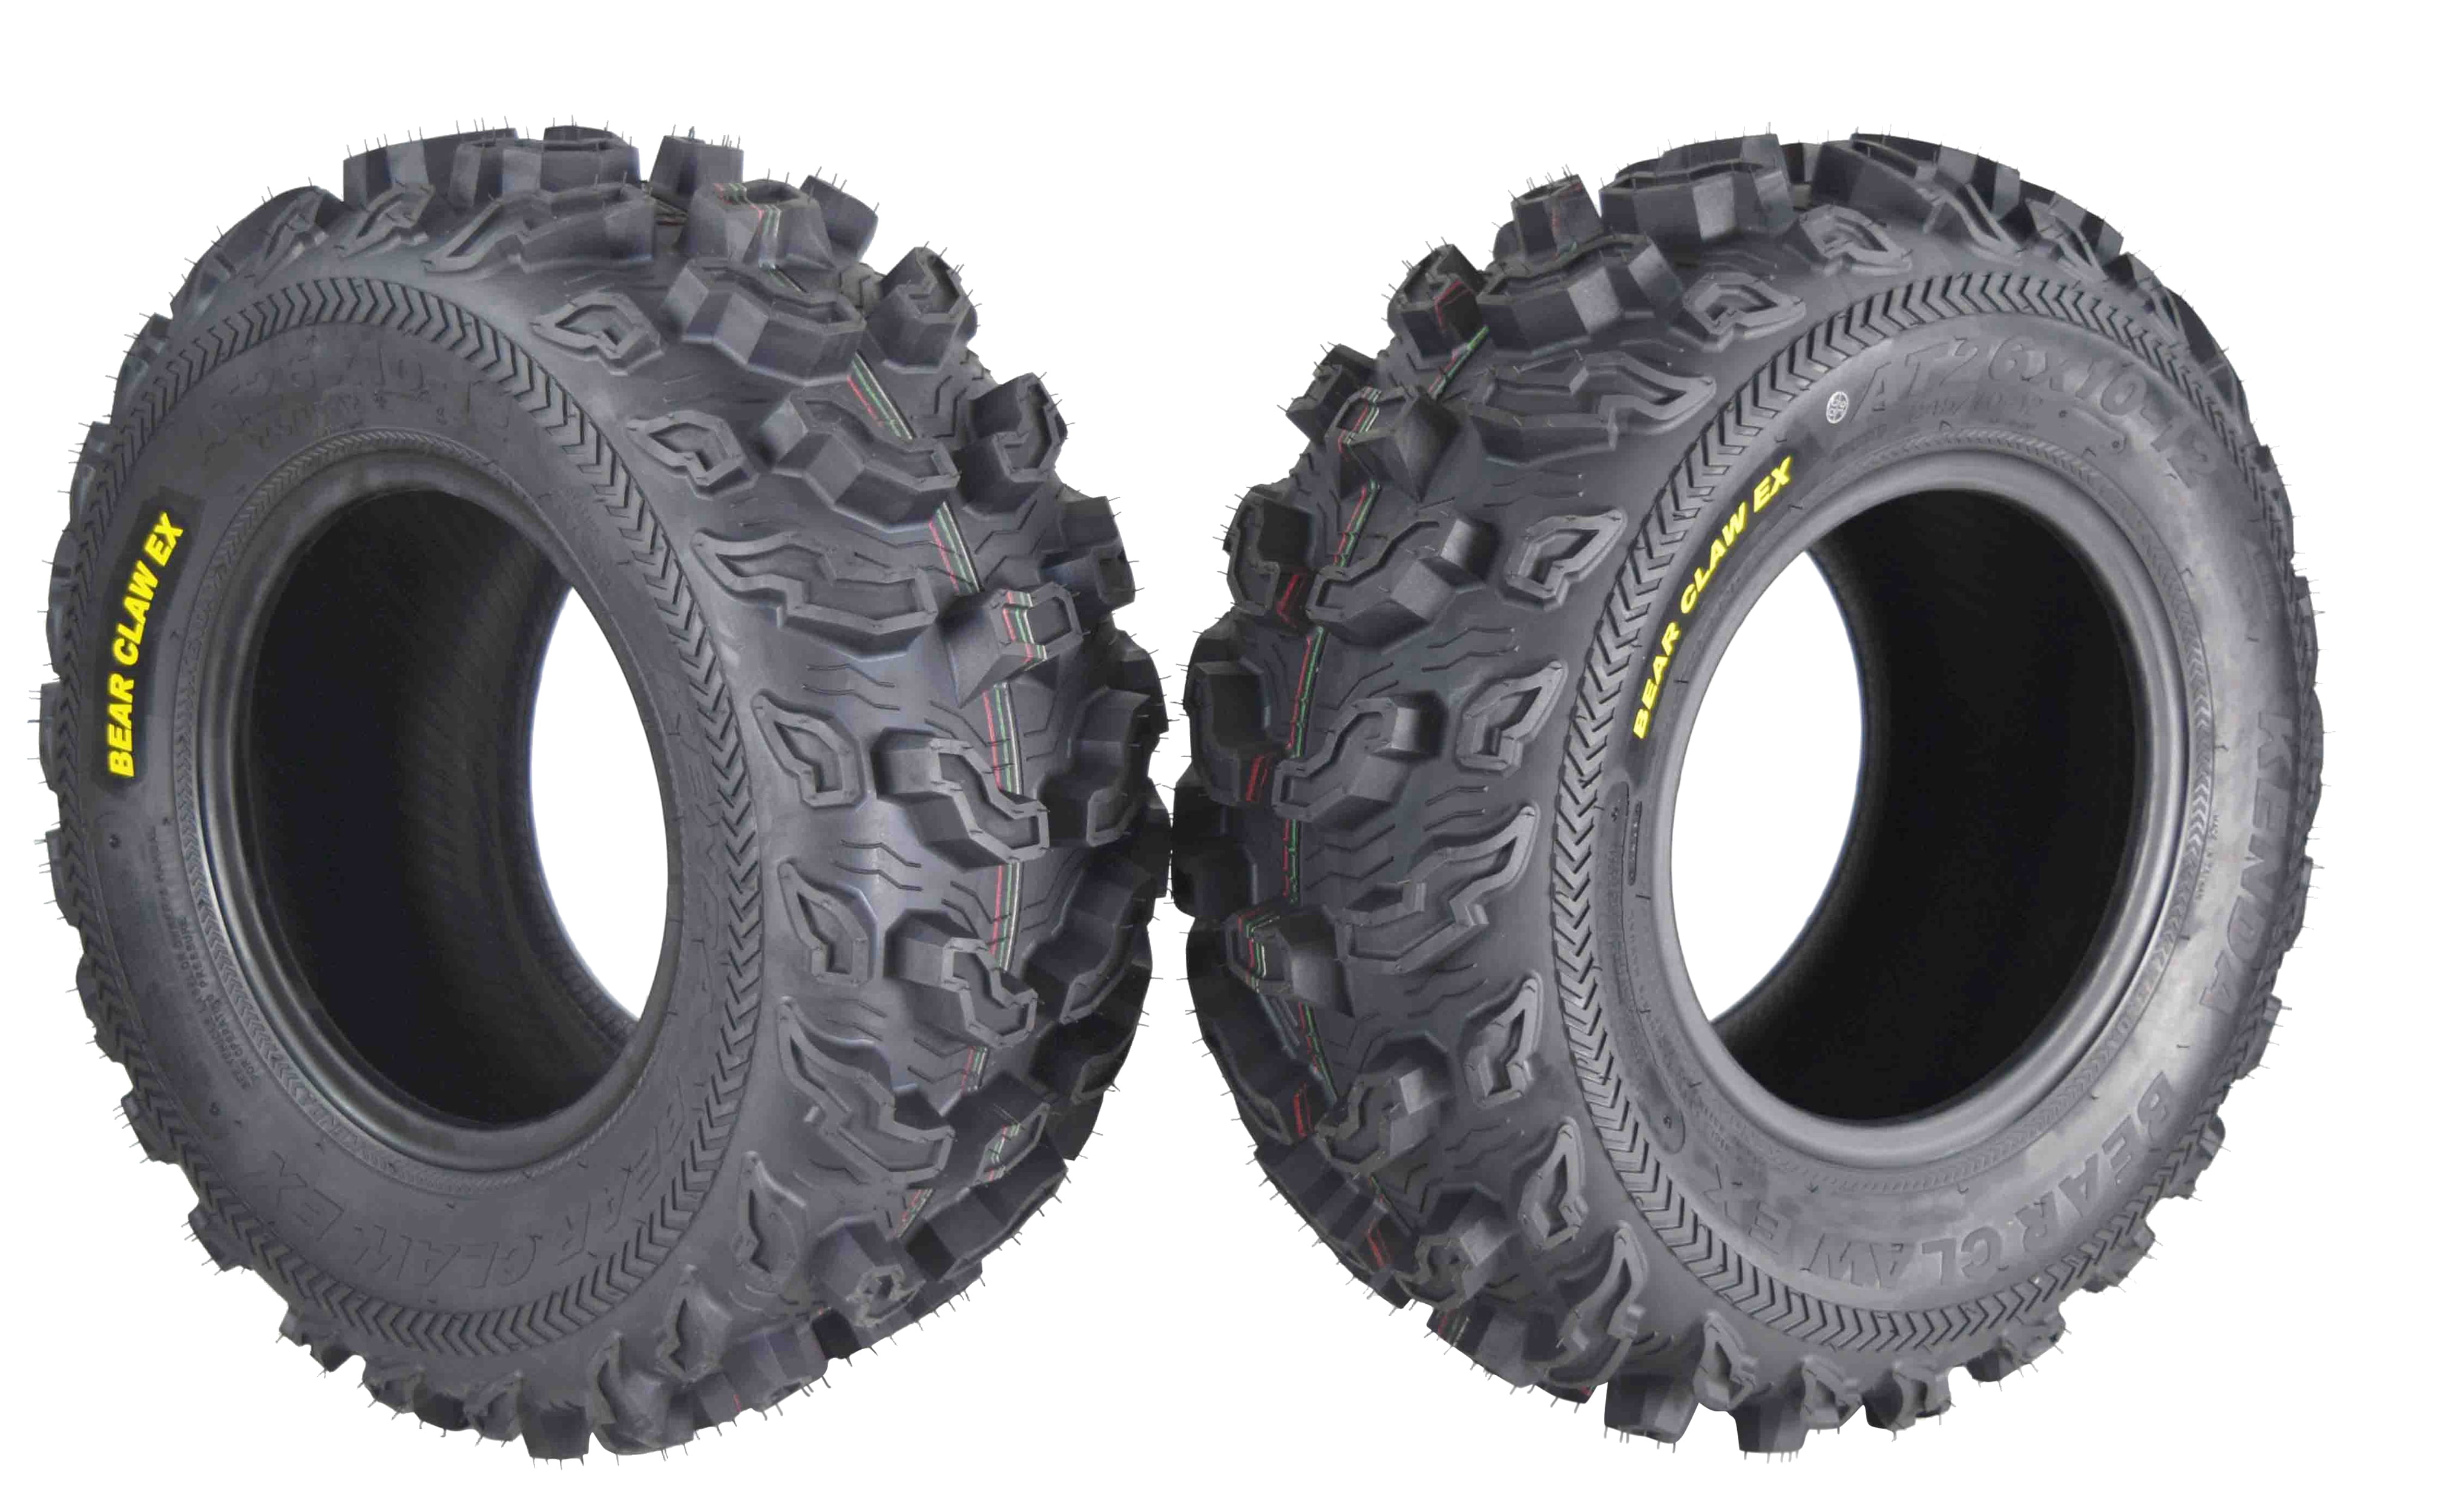 Kenda Bear Claw EX 26x10-12 Front ATV 6 PLY Tires Bearclaw 26x10x12-4 Pack 